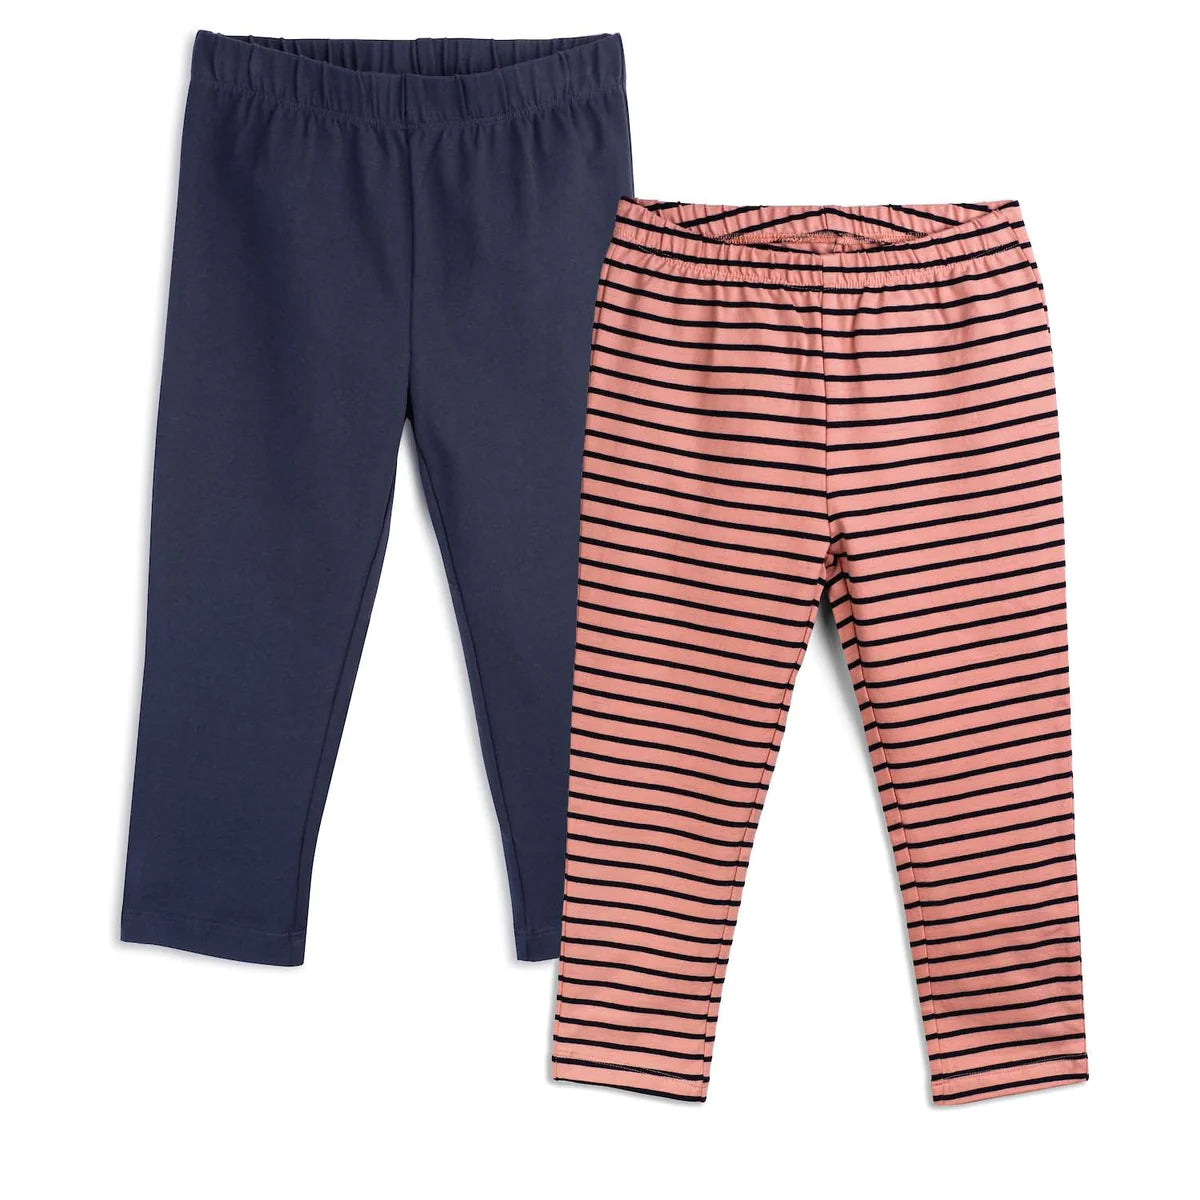 Pre-owned Pink Stripe Leggings size: 2-5T